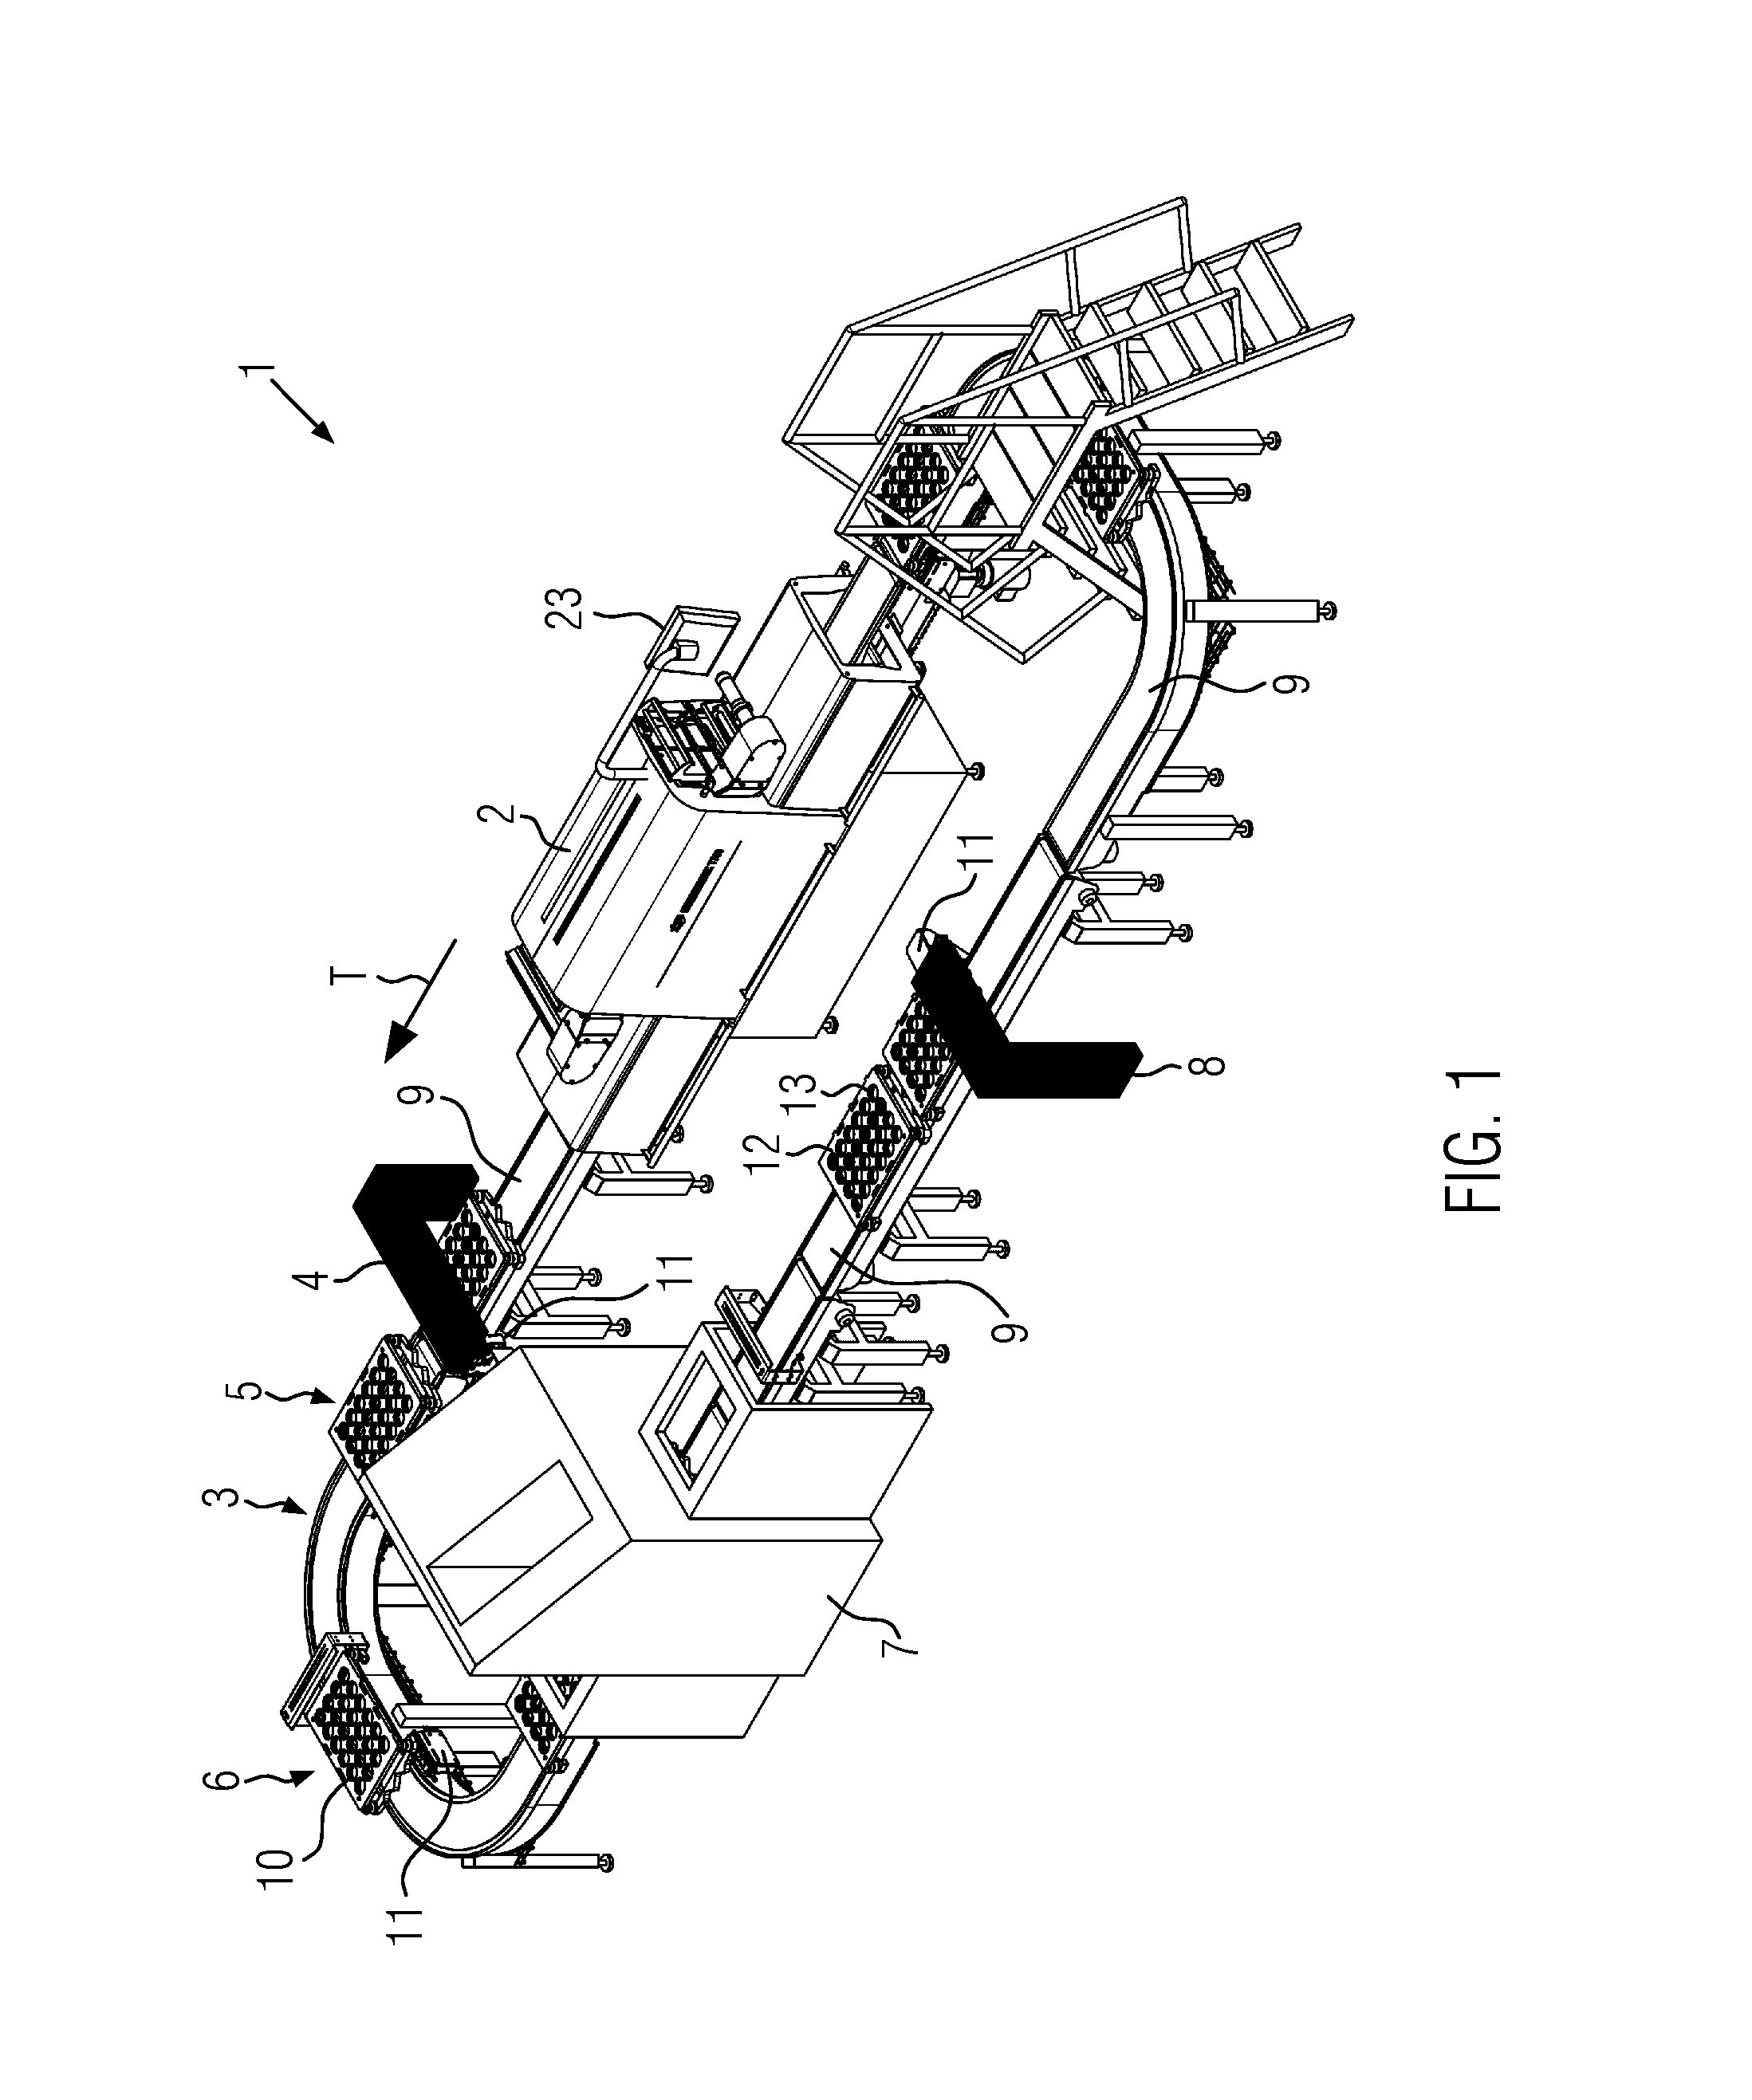 Object carrier and packaging system